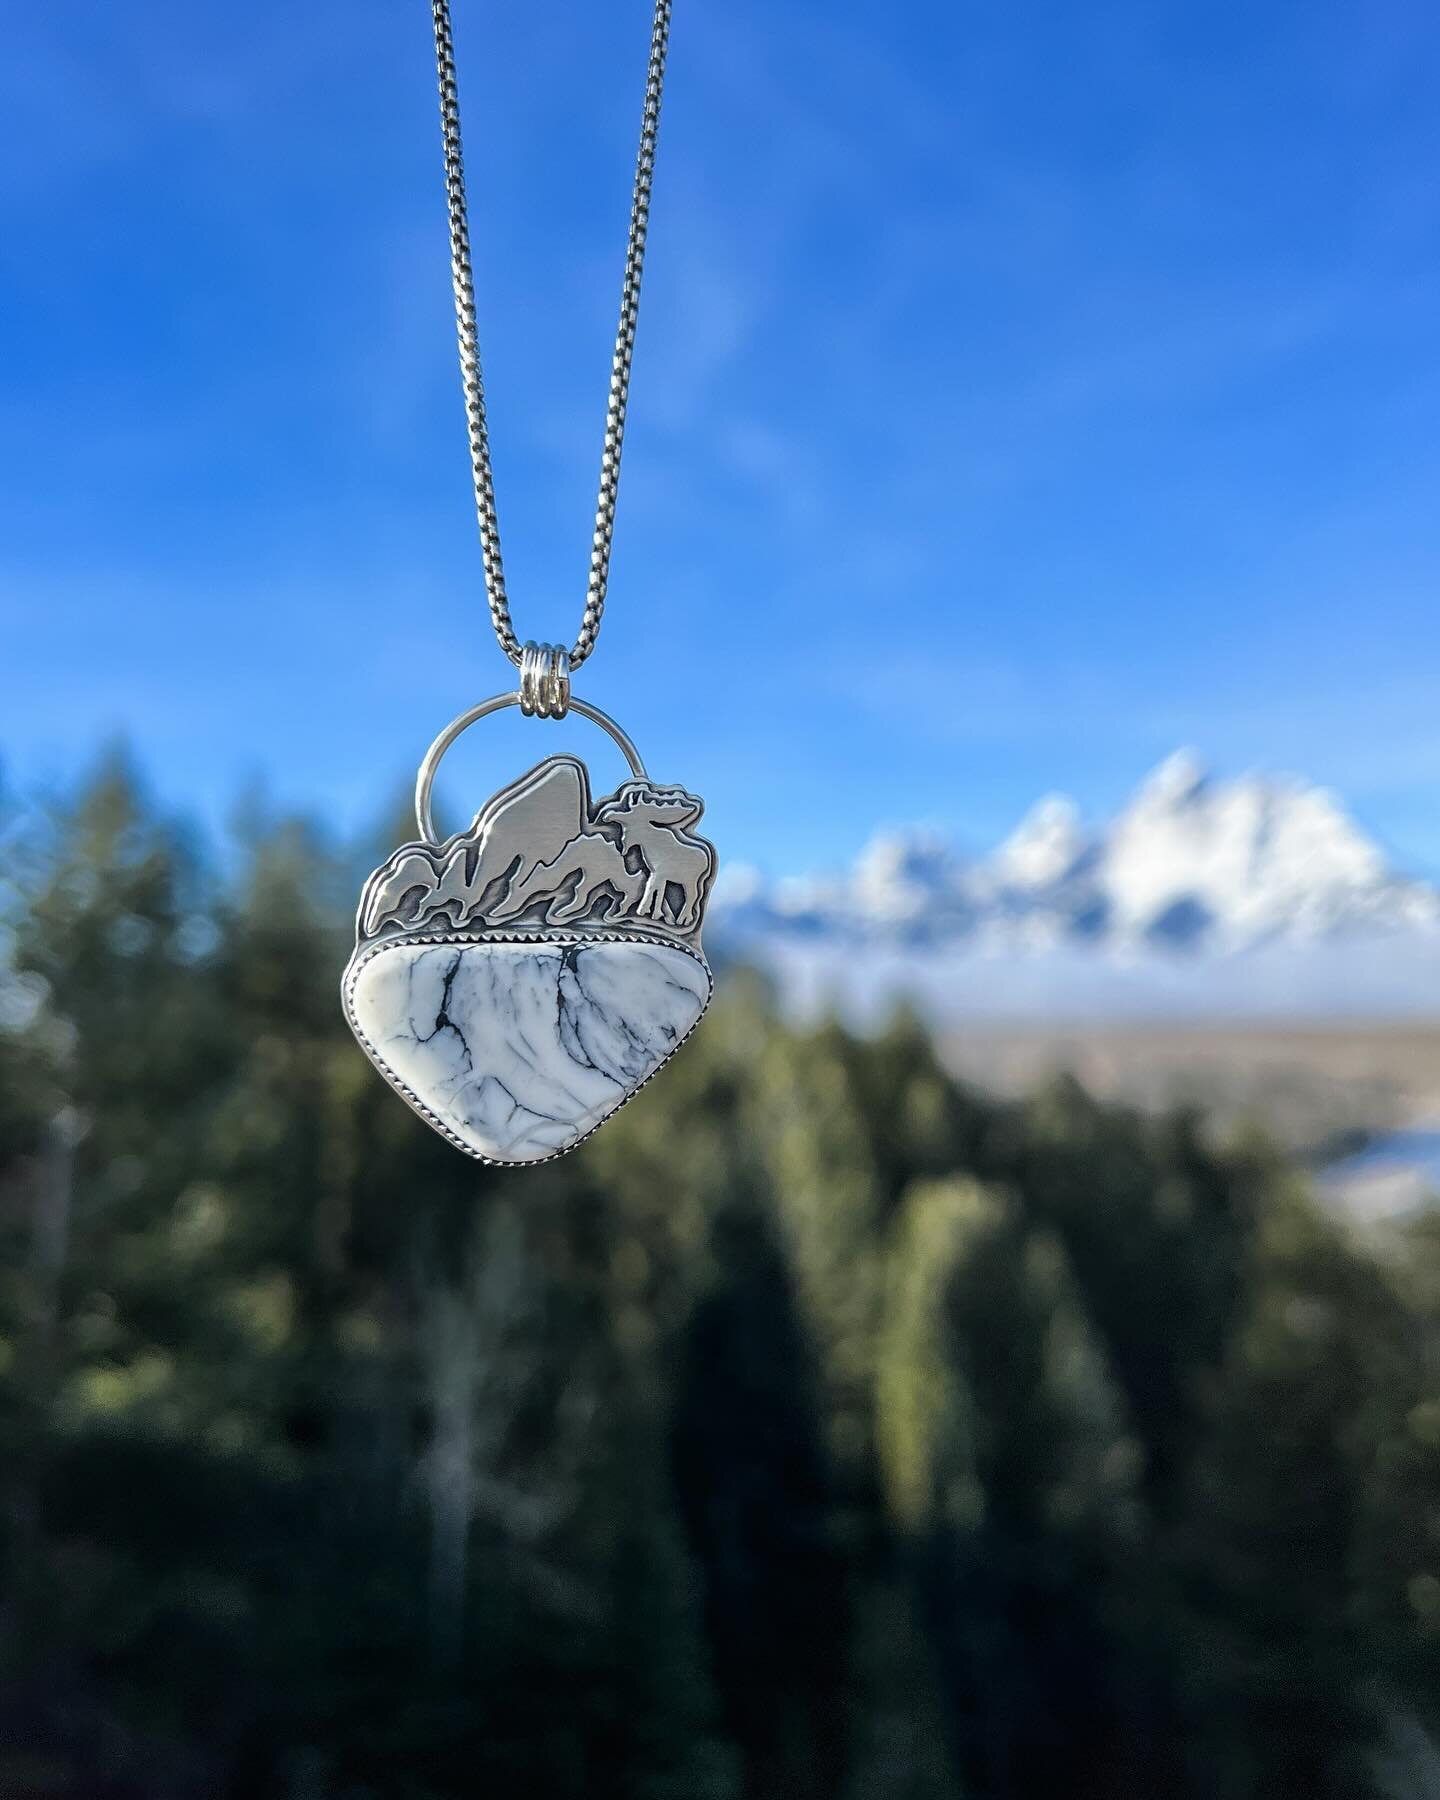 Teton Moose pendant over beautiful White Buffalo. This babe will be available tonight the 24th at 5:30pm MST, link in bio.